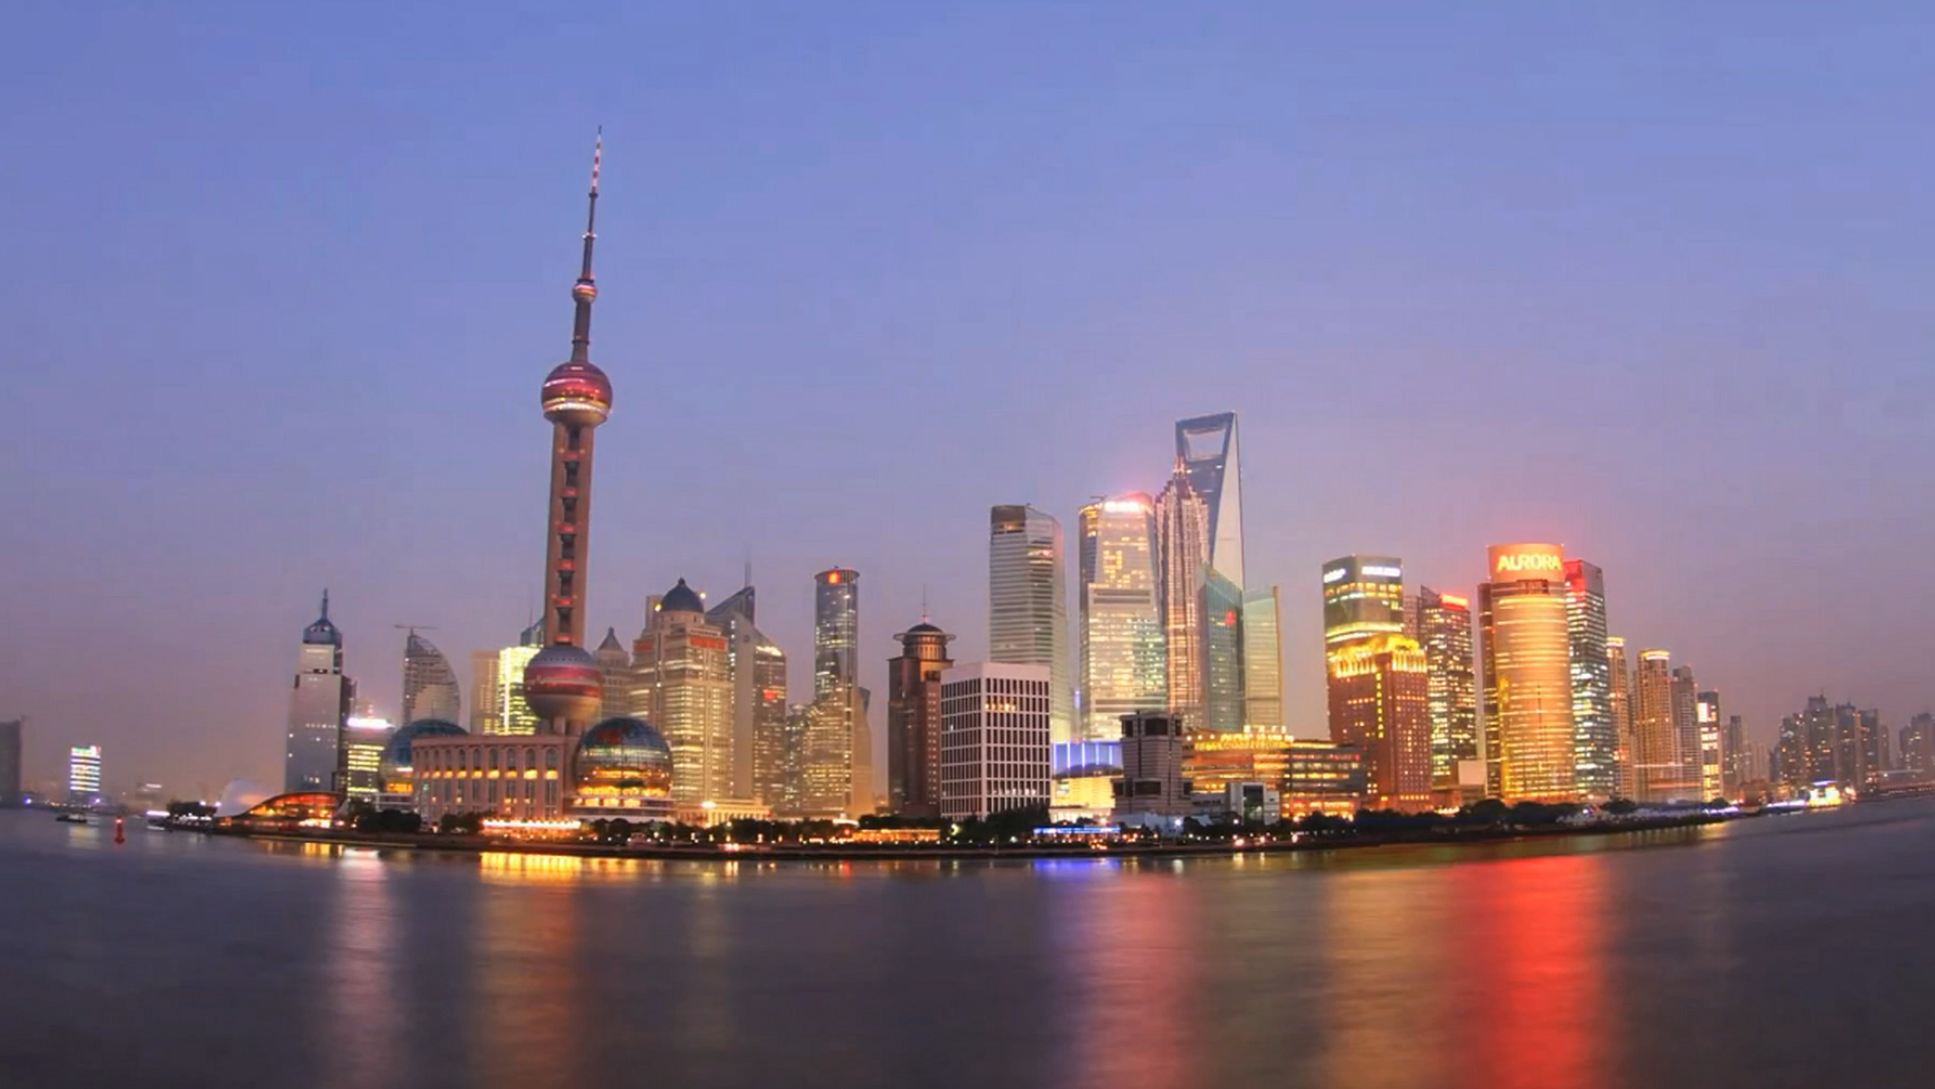 The exhibition will feature case studies in Shanghai to showcase 40 years of urbanization in China. /CGTN